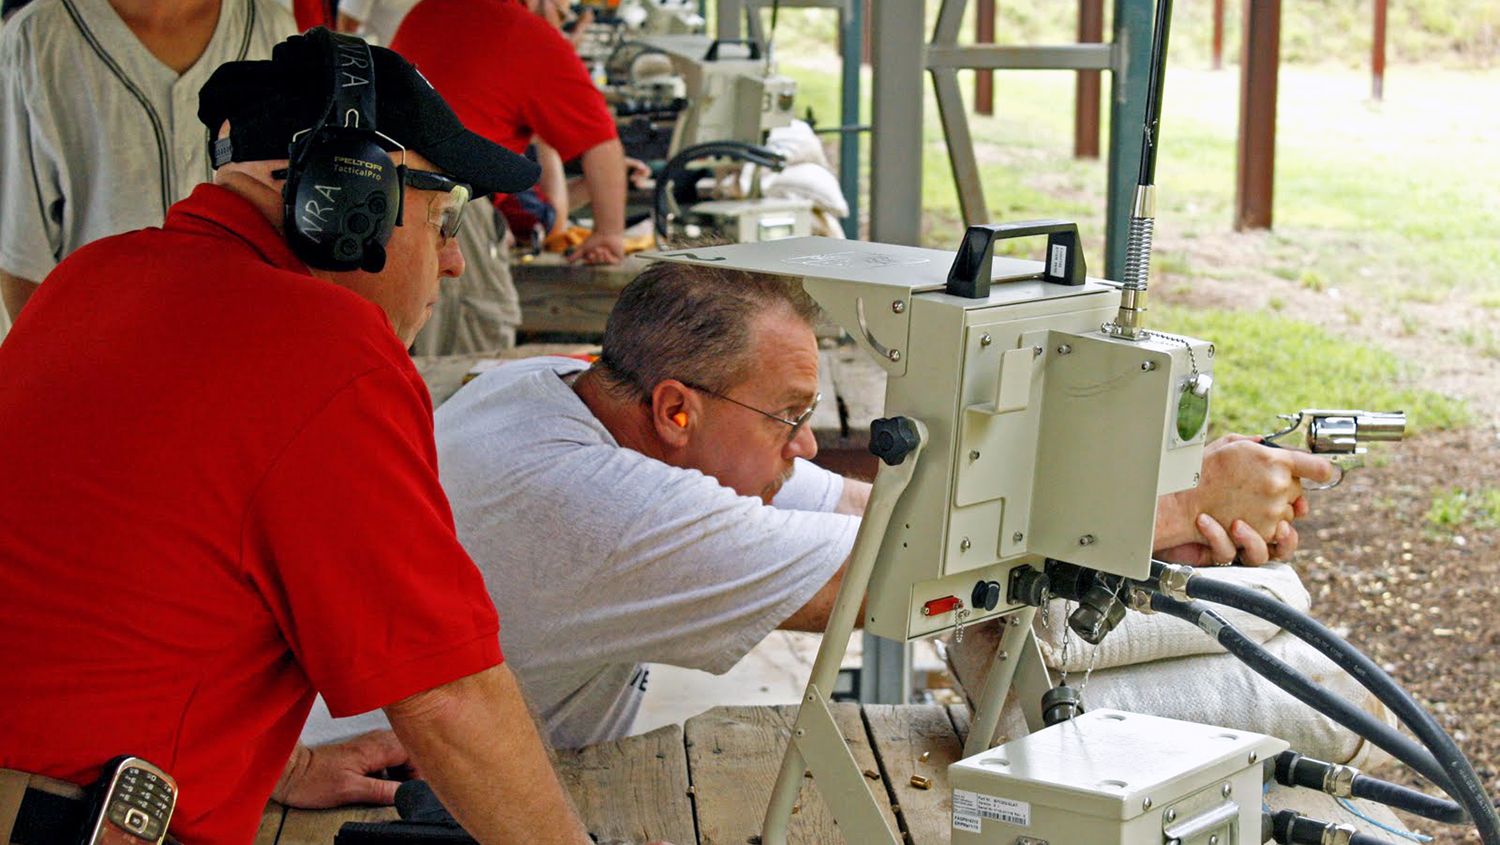 NRA Safety Instructor College Course Prepares to Graduate First Student